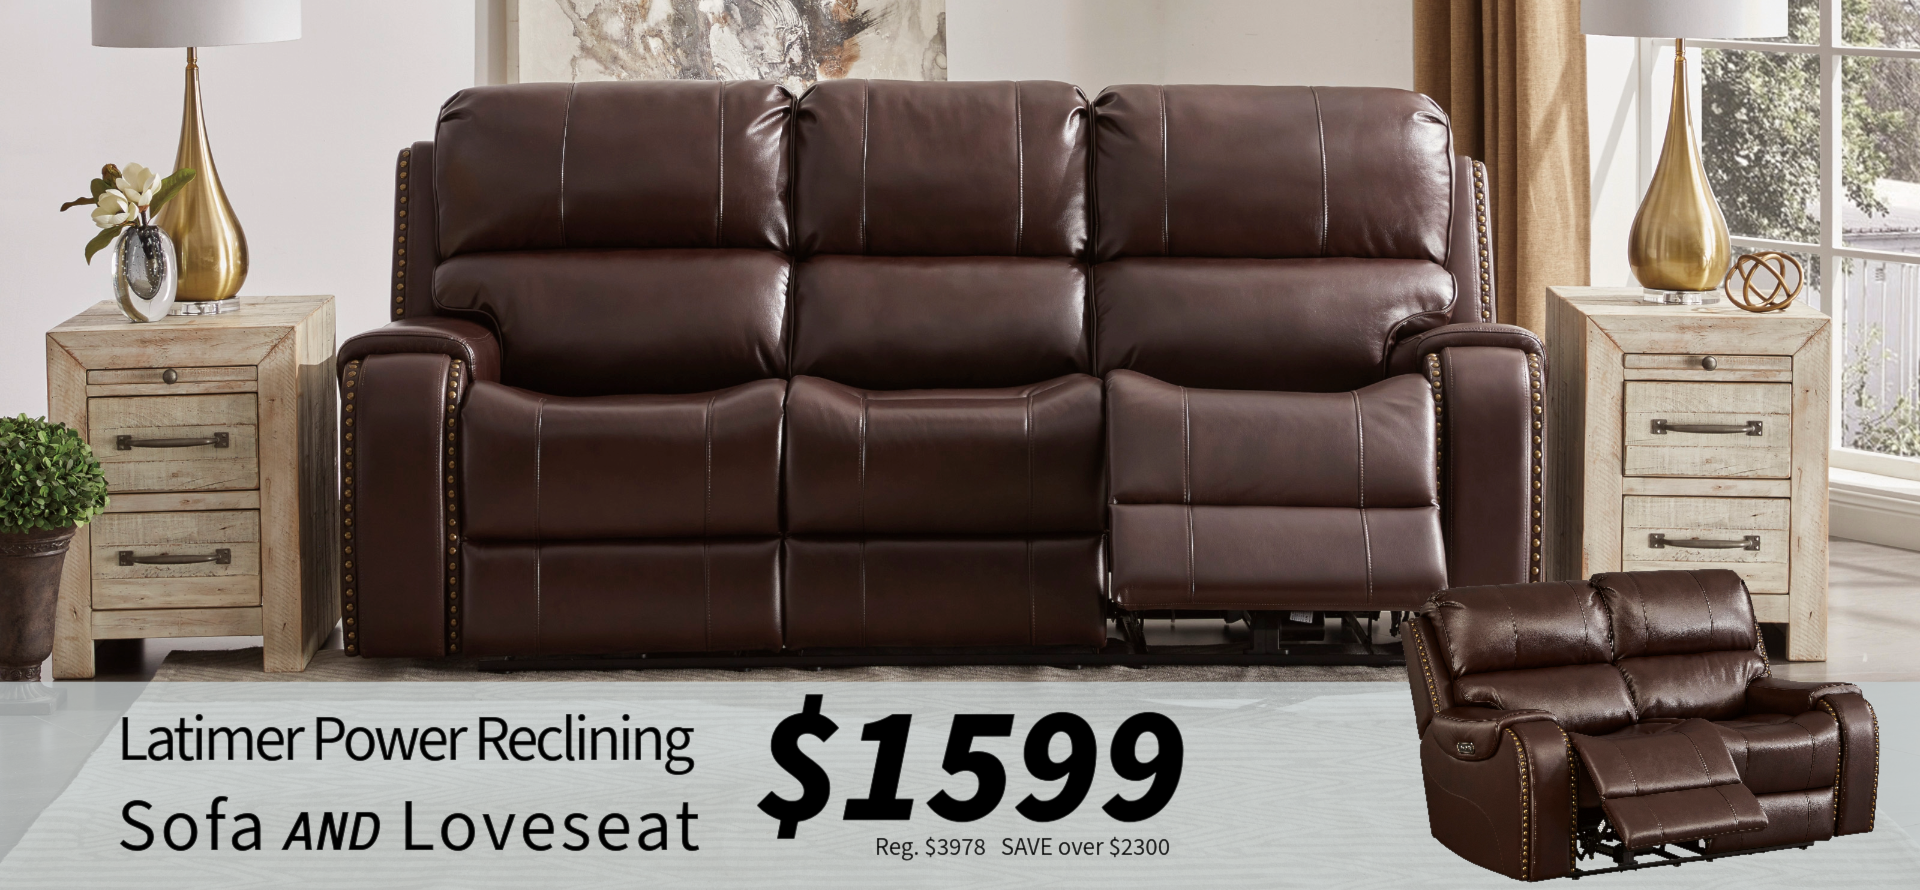 67005 Latimer Sofa and Loveseat for $1599 during the VIP Sale Only